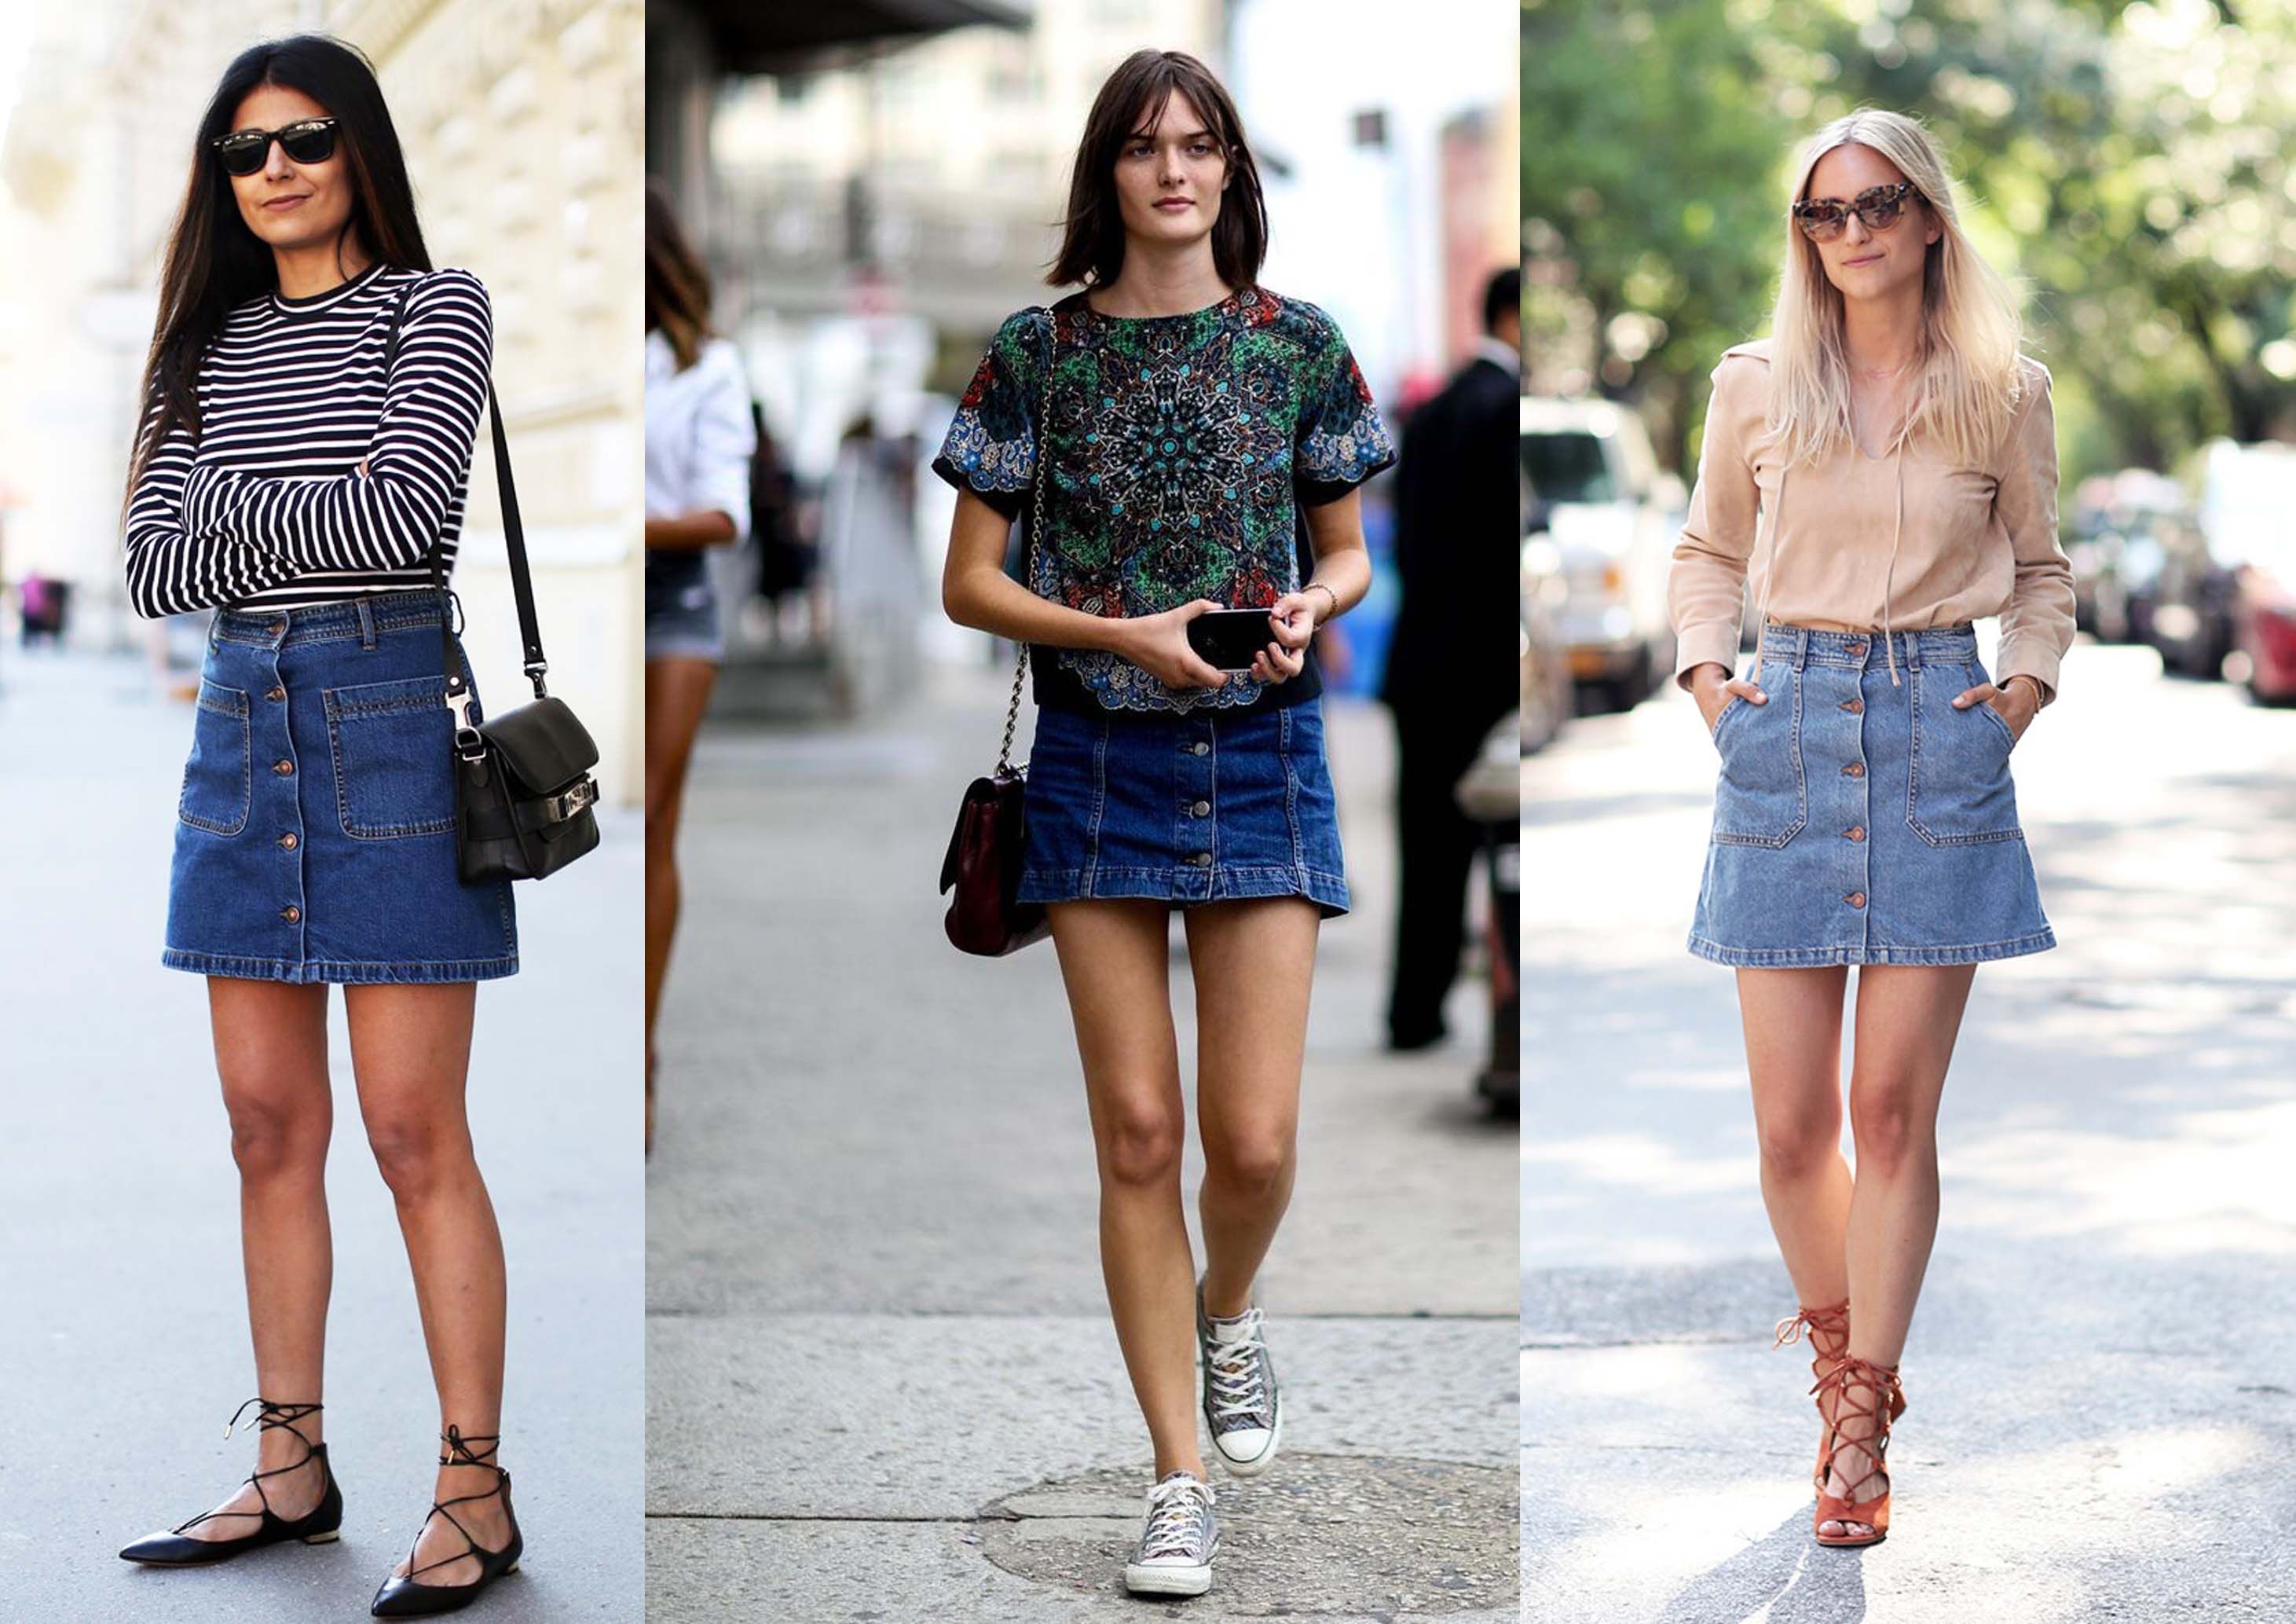 Check Out How to Choose a Denim Skirt Model Based on Body Shape